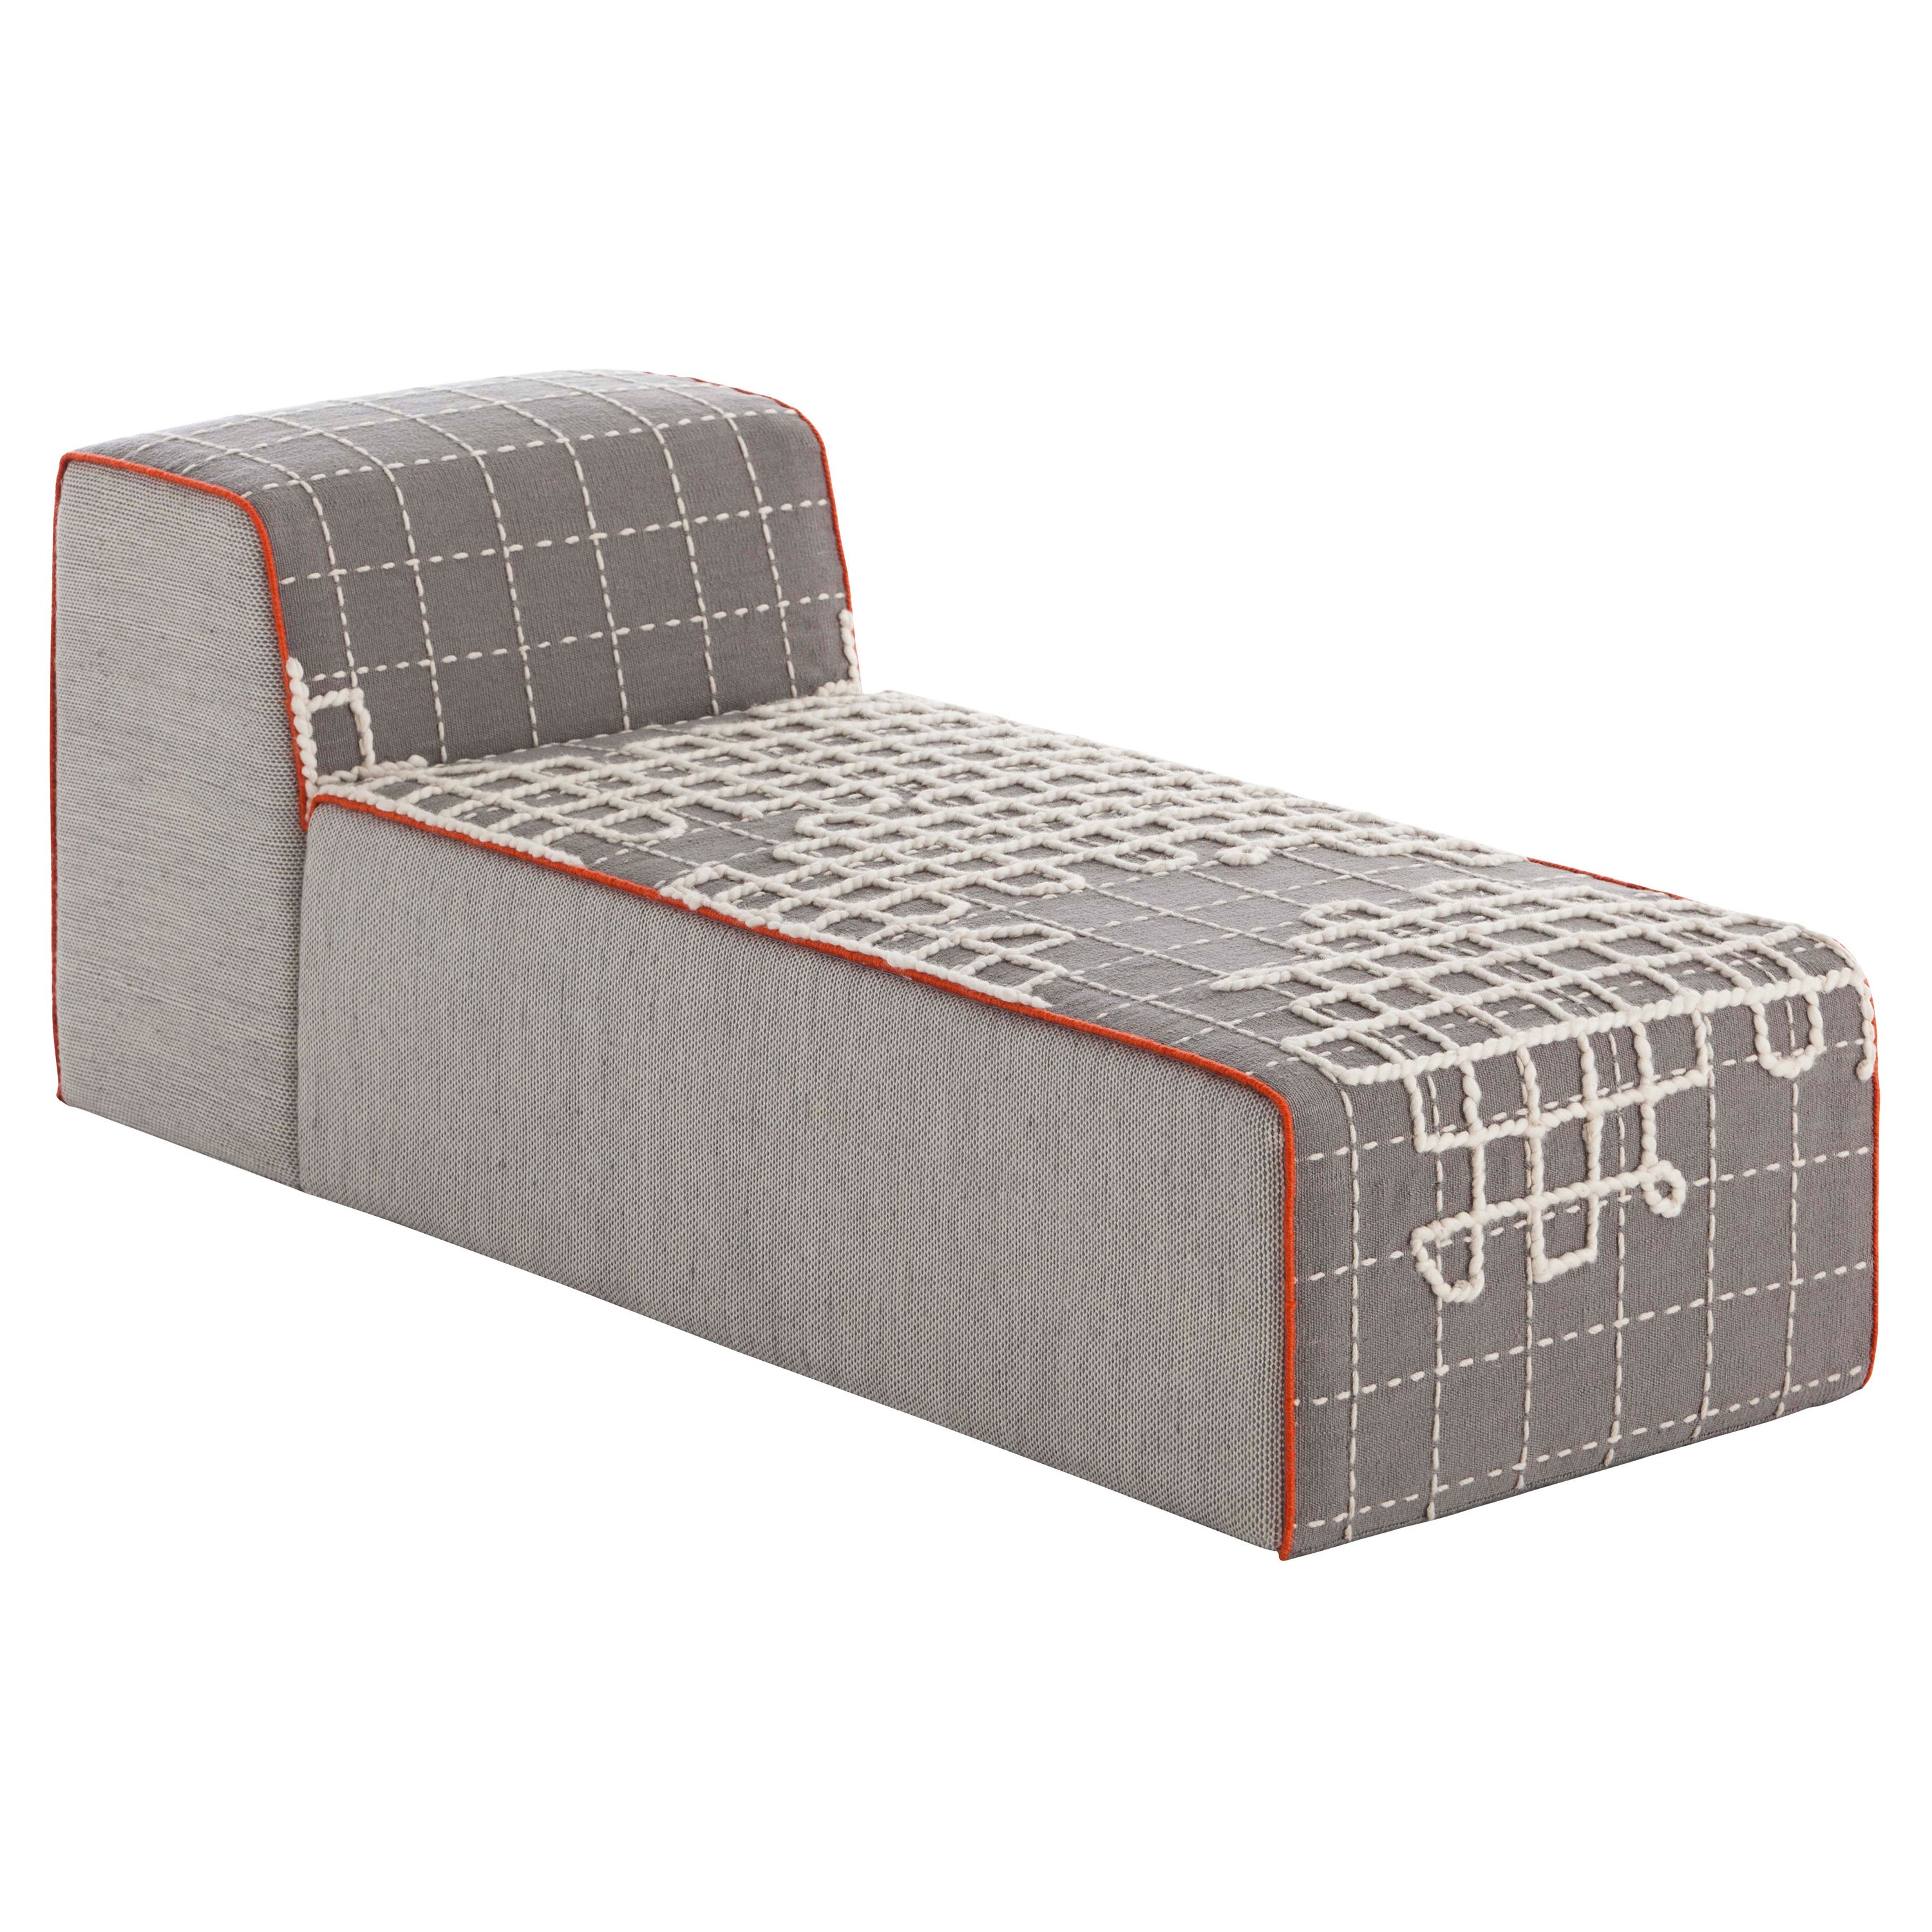 Gan Spaces Bandas Chaise Longue in a Grey with Wood Frame by Patricia Urquiola For Sale